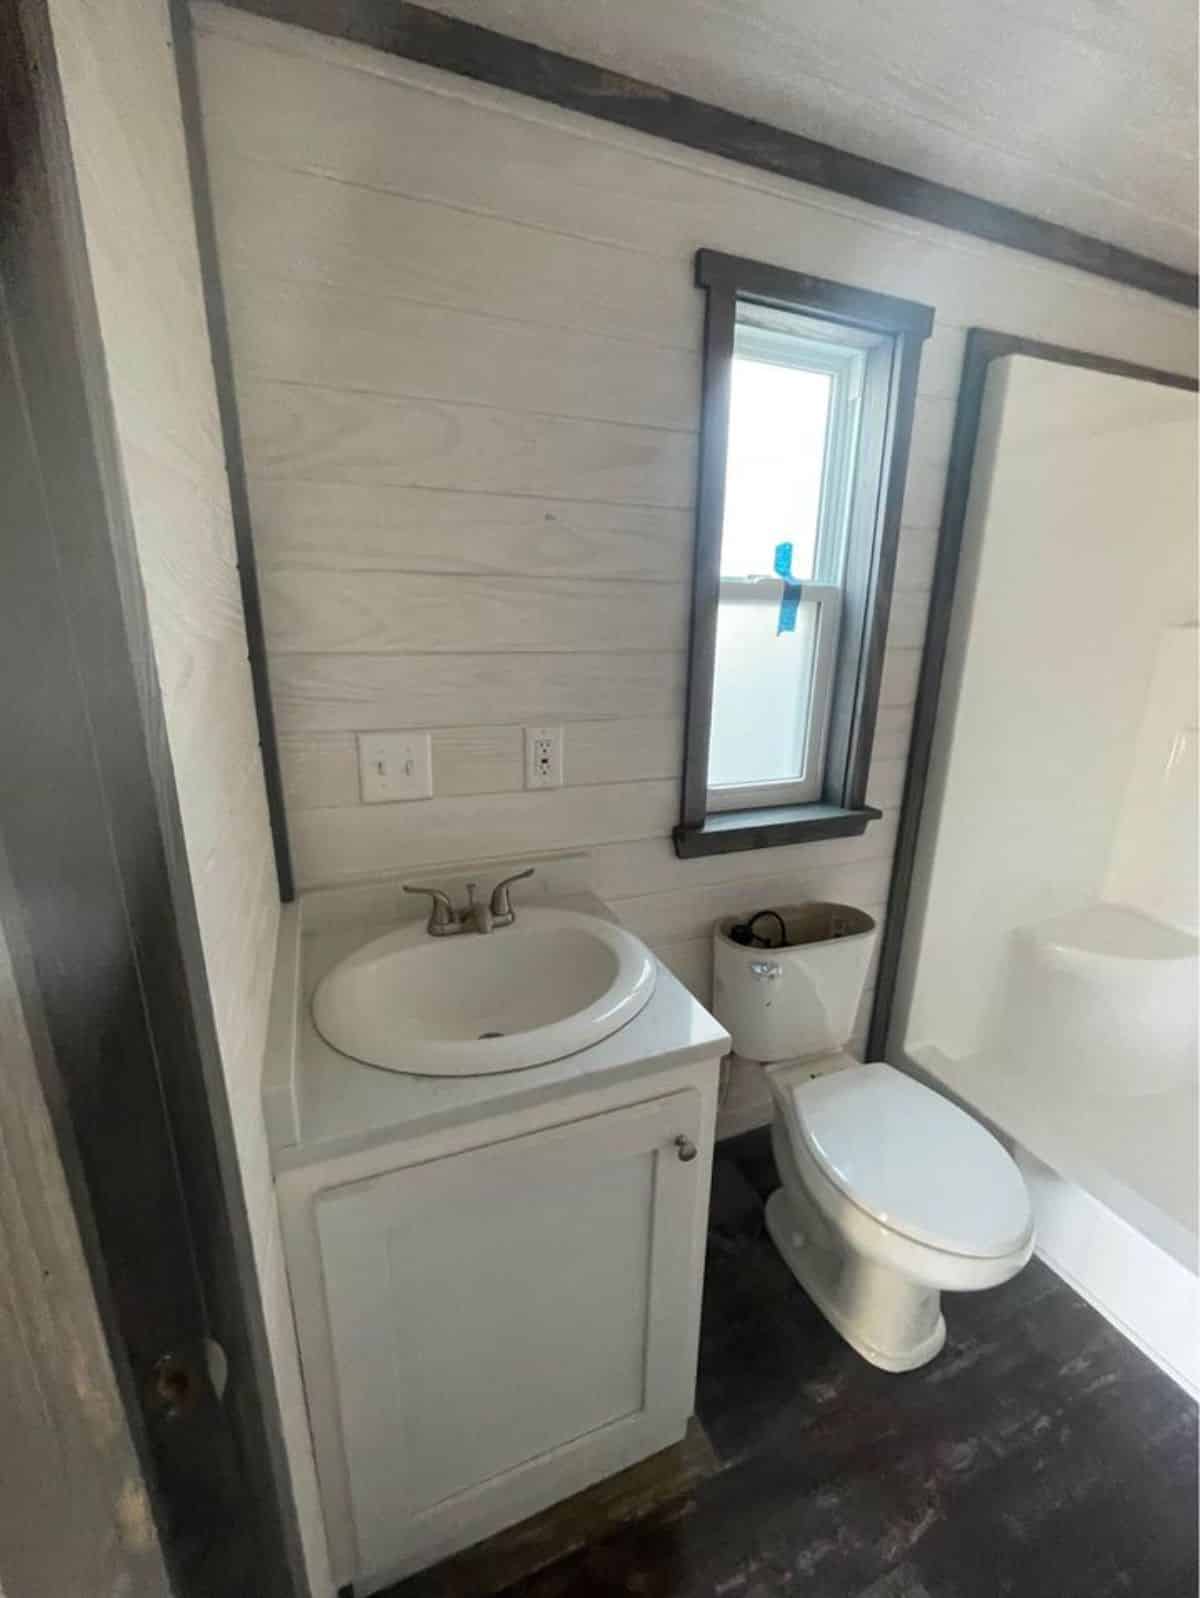 Bathroom of tiny luxury home has all the standard fittings